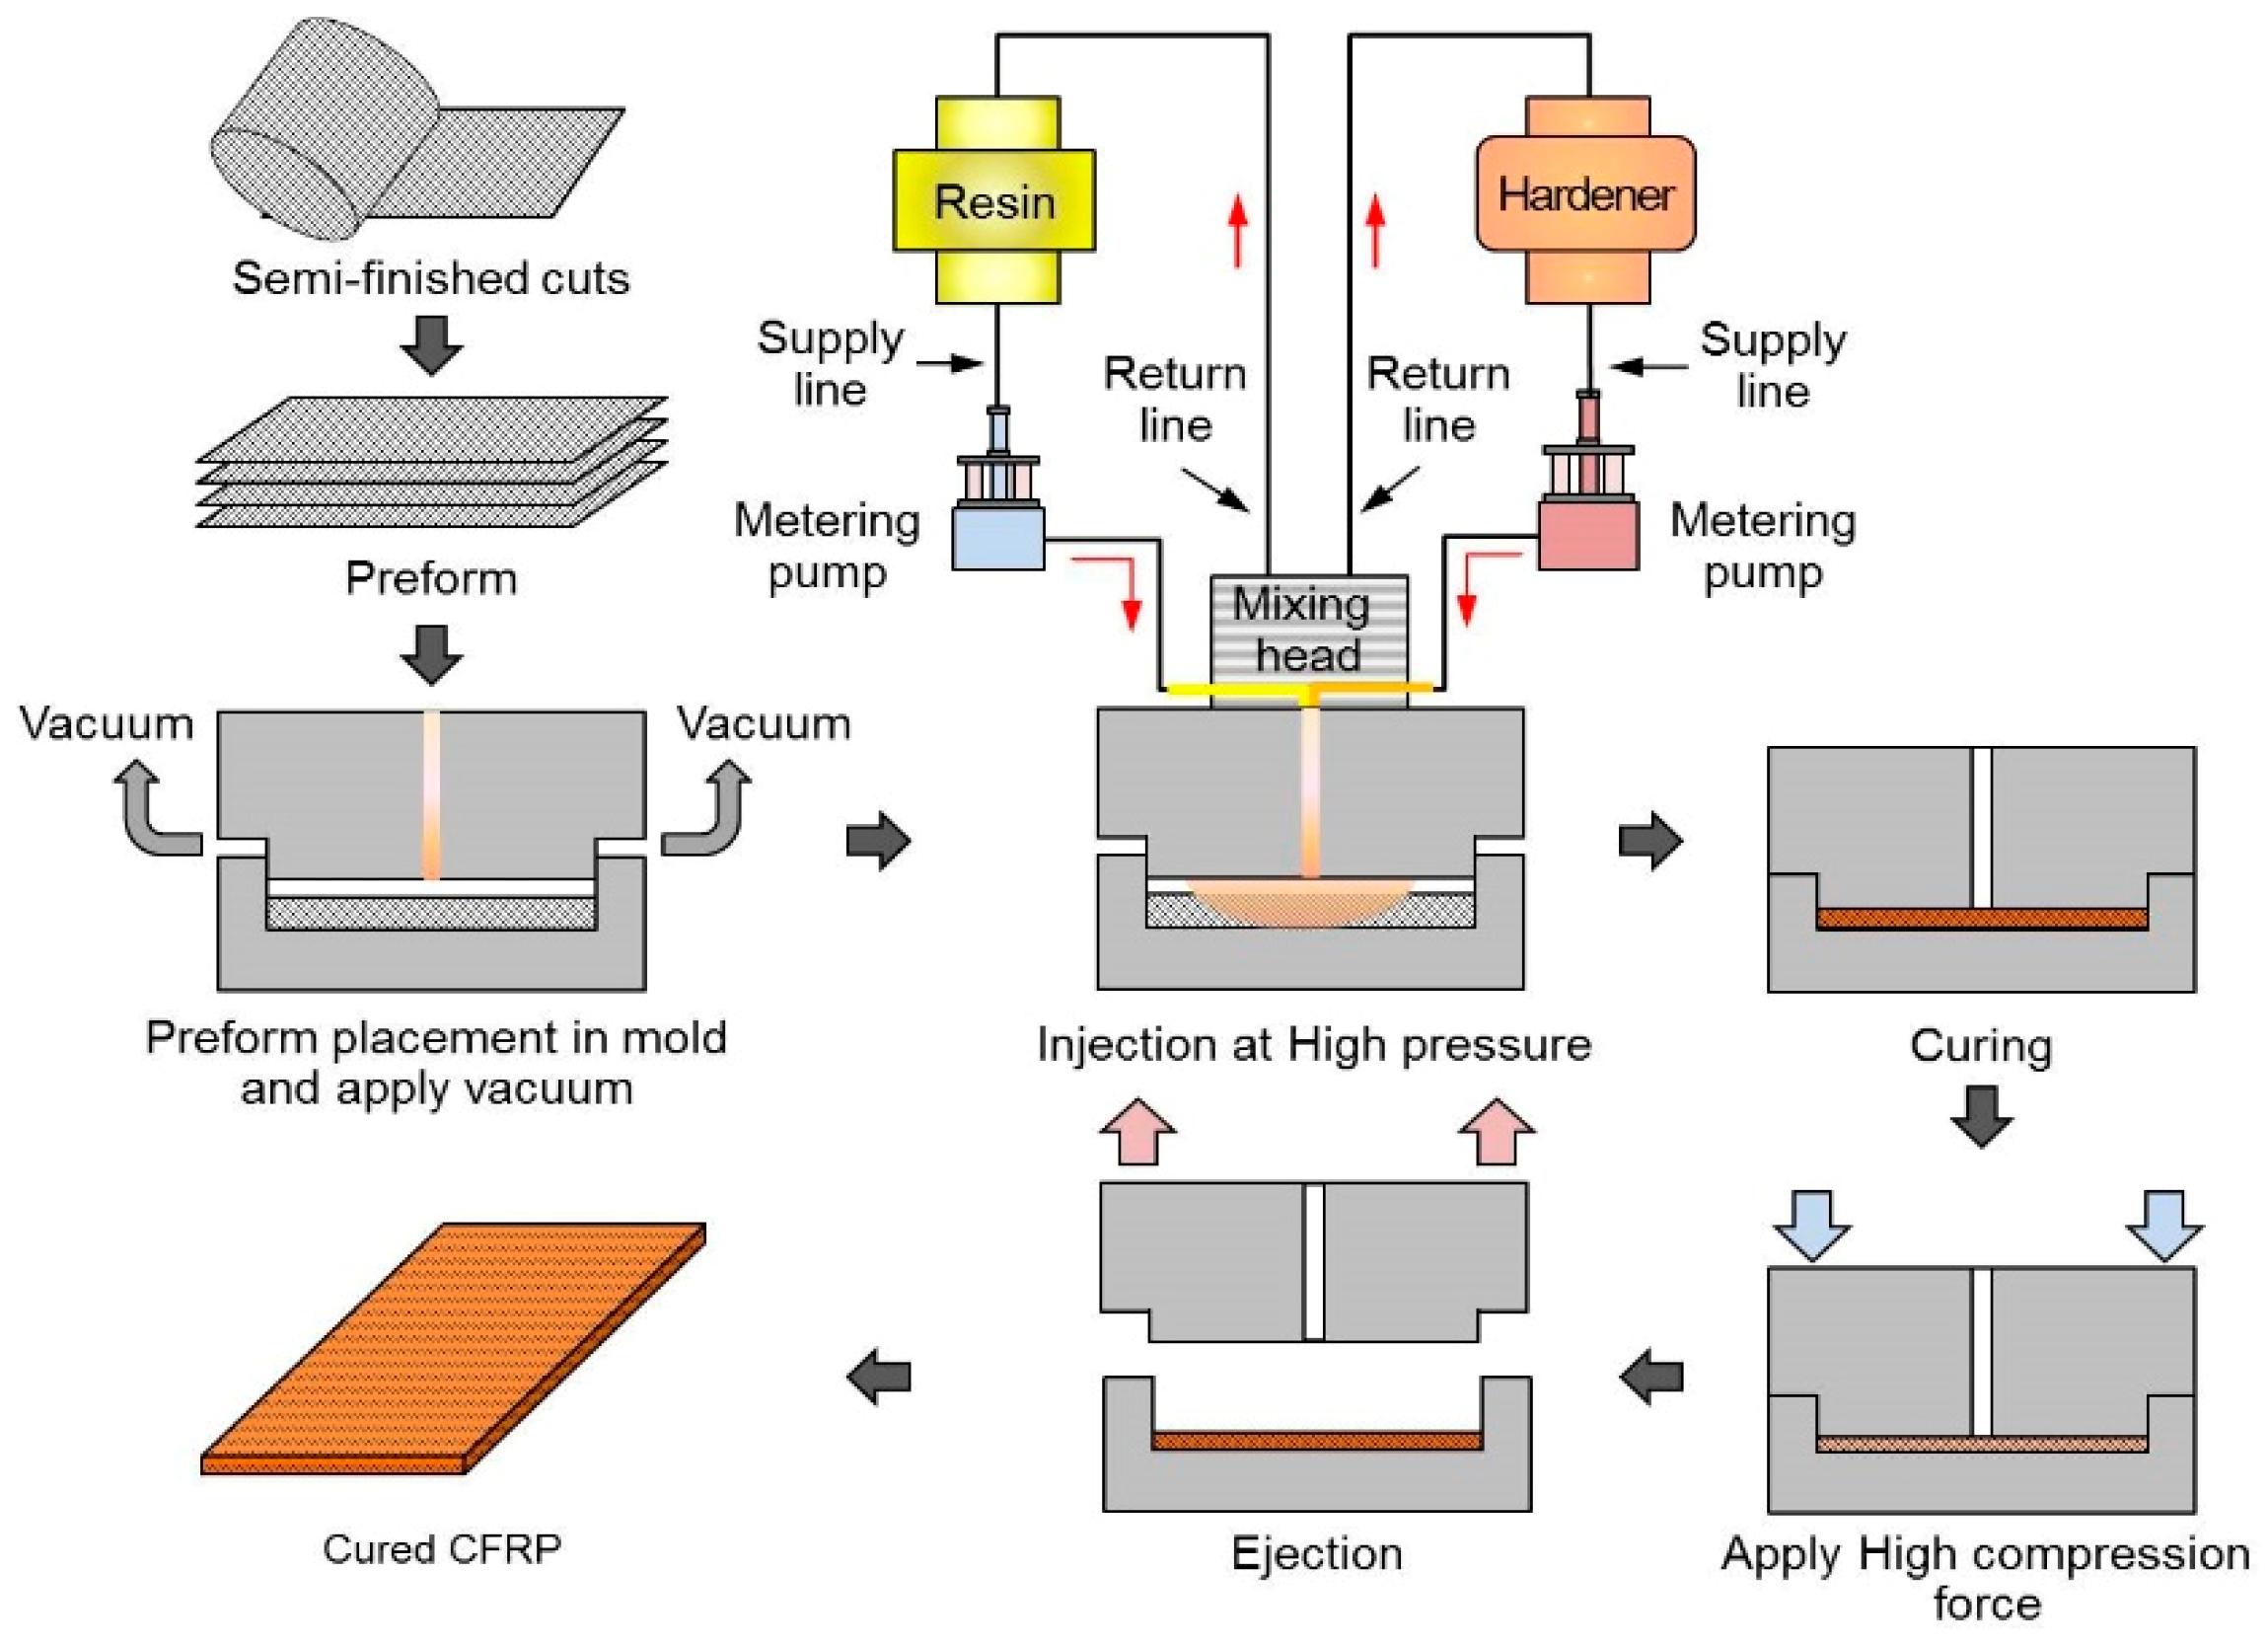 Applied Sciences | Free Full-Text | Embedded Based Real-Time Monitoring in  the High-Pressure Resin Transfer Molding Process for CFRP